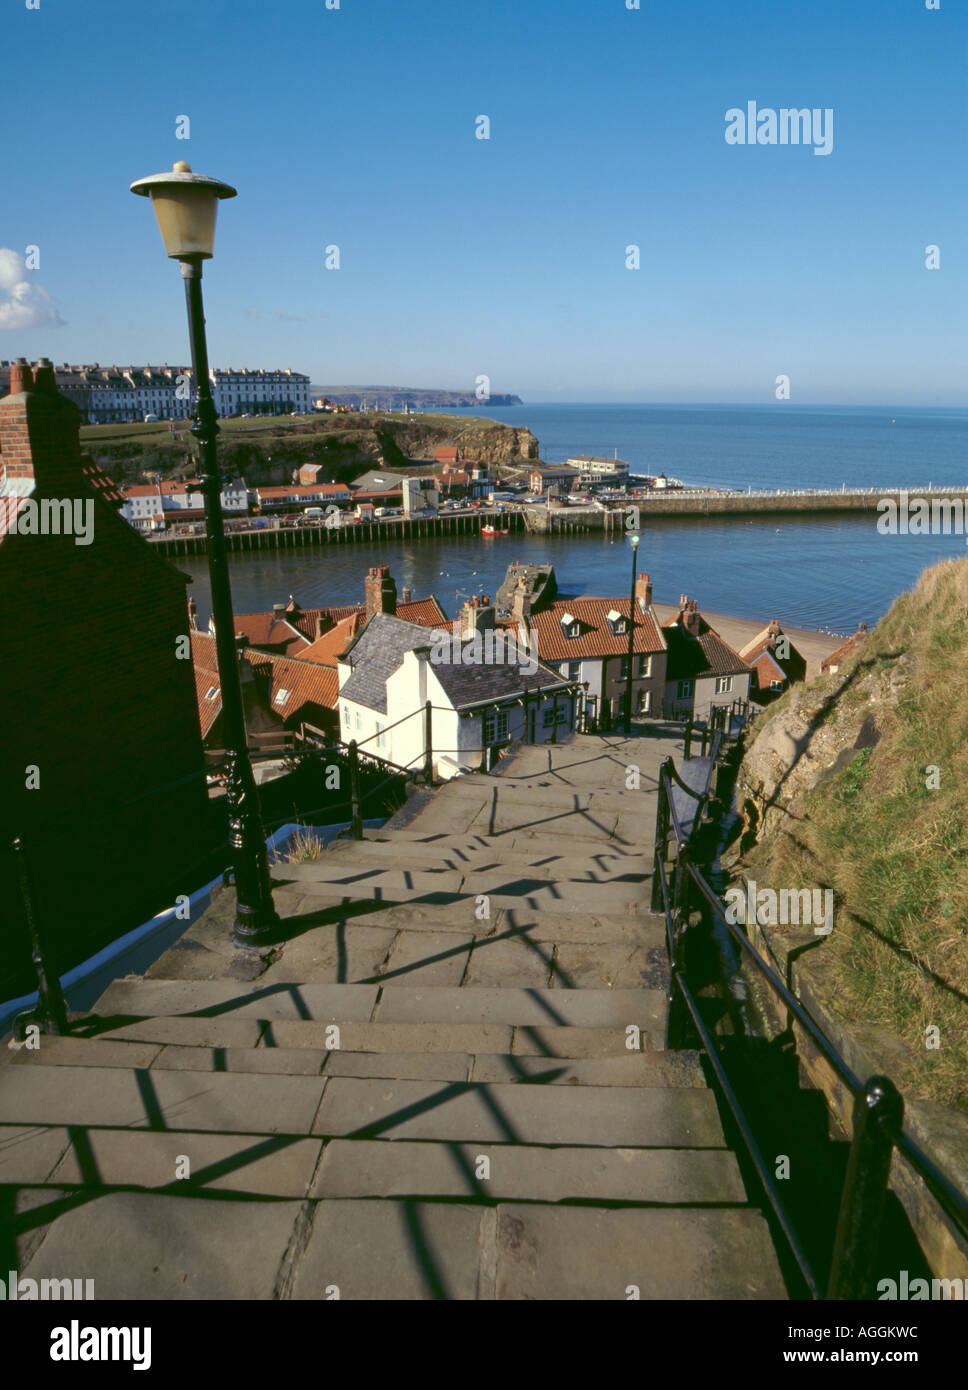 Looking down the East Cliff's flight of 199 steps, with harbour and North Sea beyond, Whitby, North Yorkshire, England, UK Stock Photo